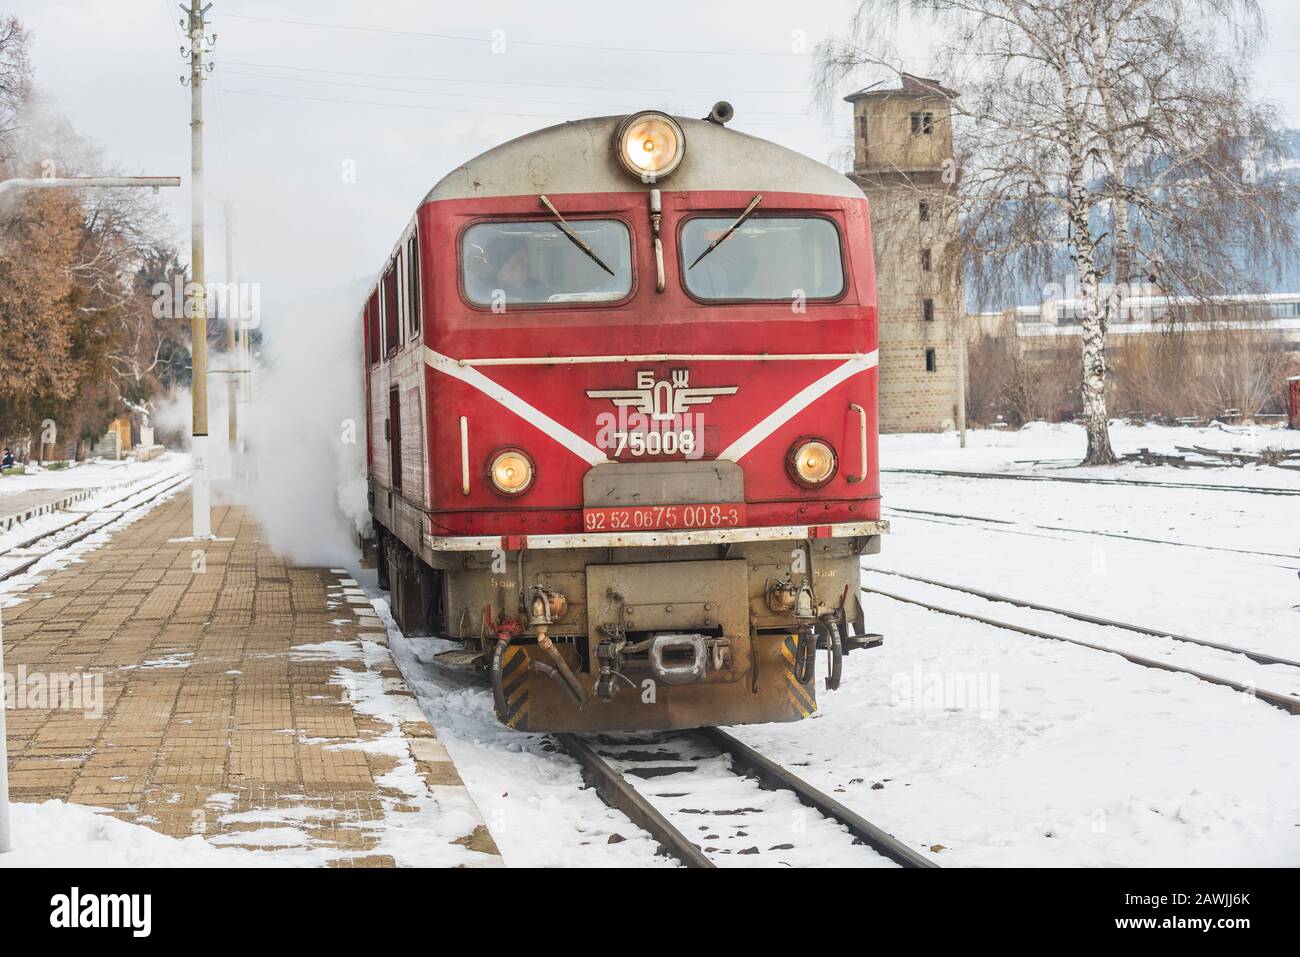 Velingrad railway station, Bulgaria - February 8, 2020: Train with red locomotive and green wagons arrives at the train station. Stock Photo